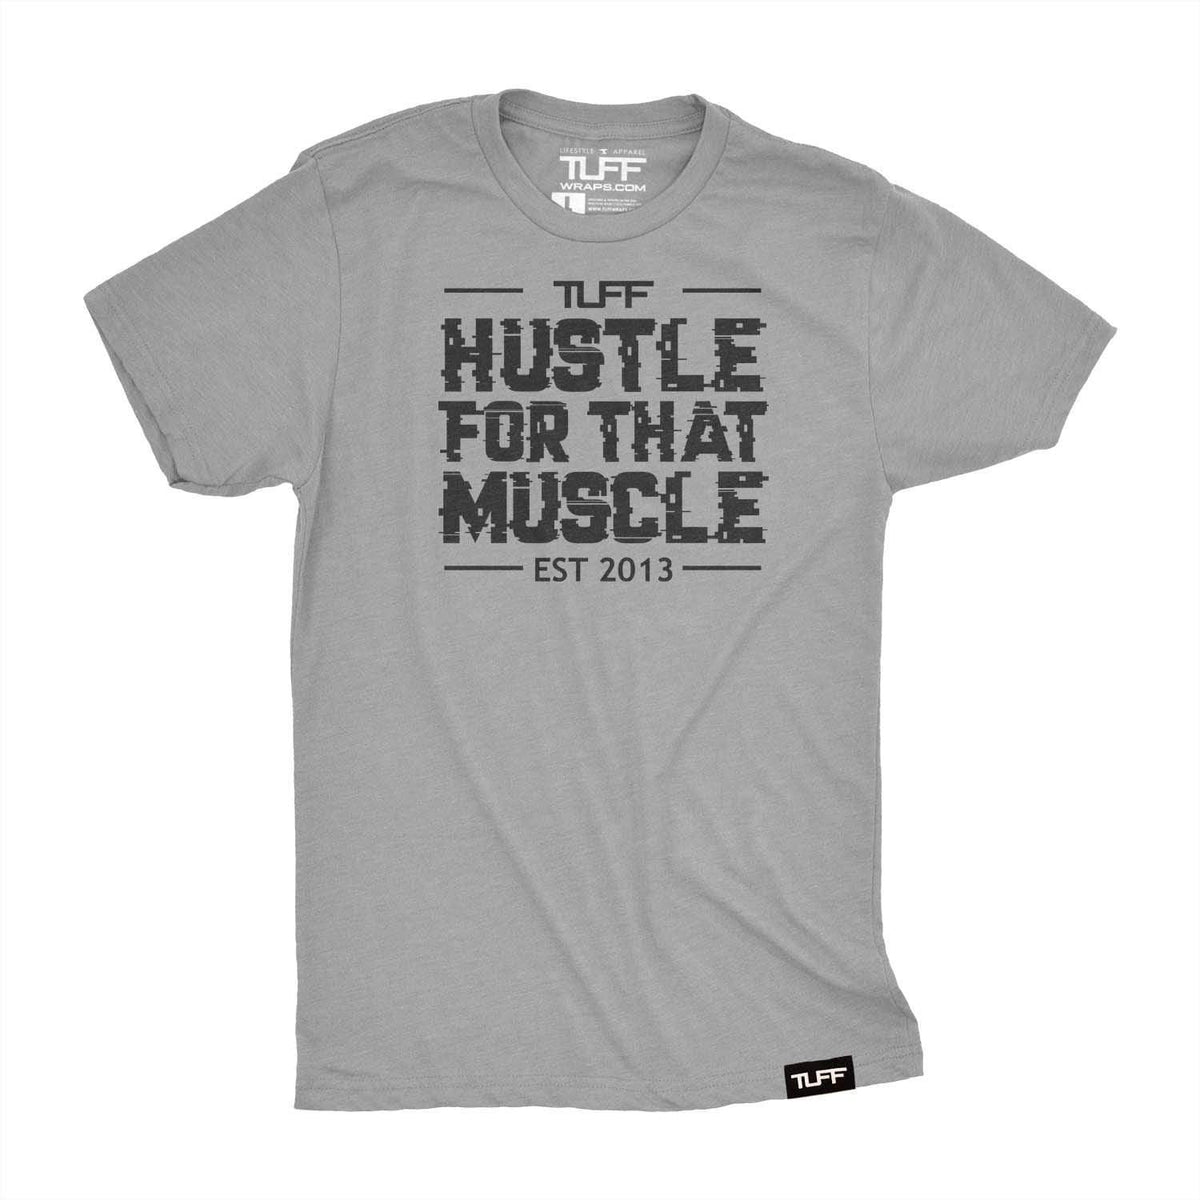 Hustle For That Muscle Tee S / Heather Gray TuffWraps.com